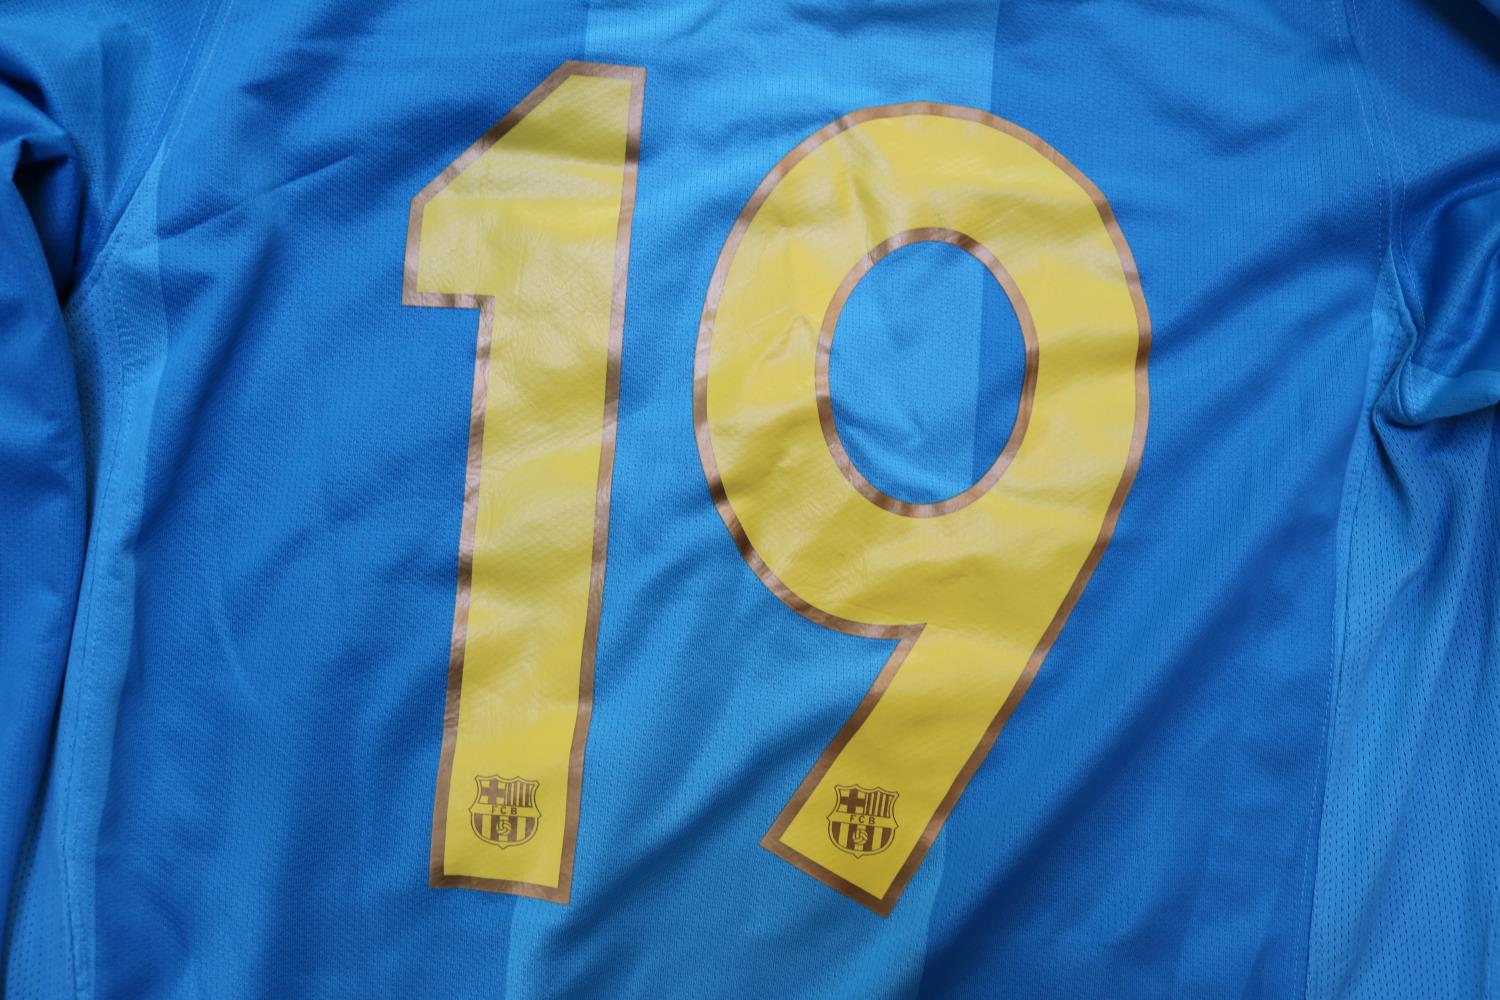 LIONEL MESSI 2008/2009 MATCH WORN #19 BARCELONA AWAY JERSEY Lionel Messi wore this number "19" - Image 8 of 9